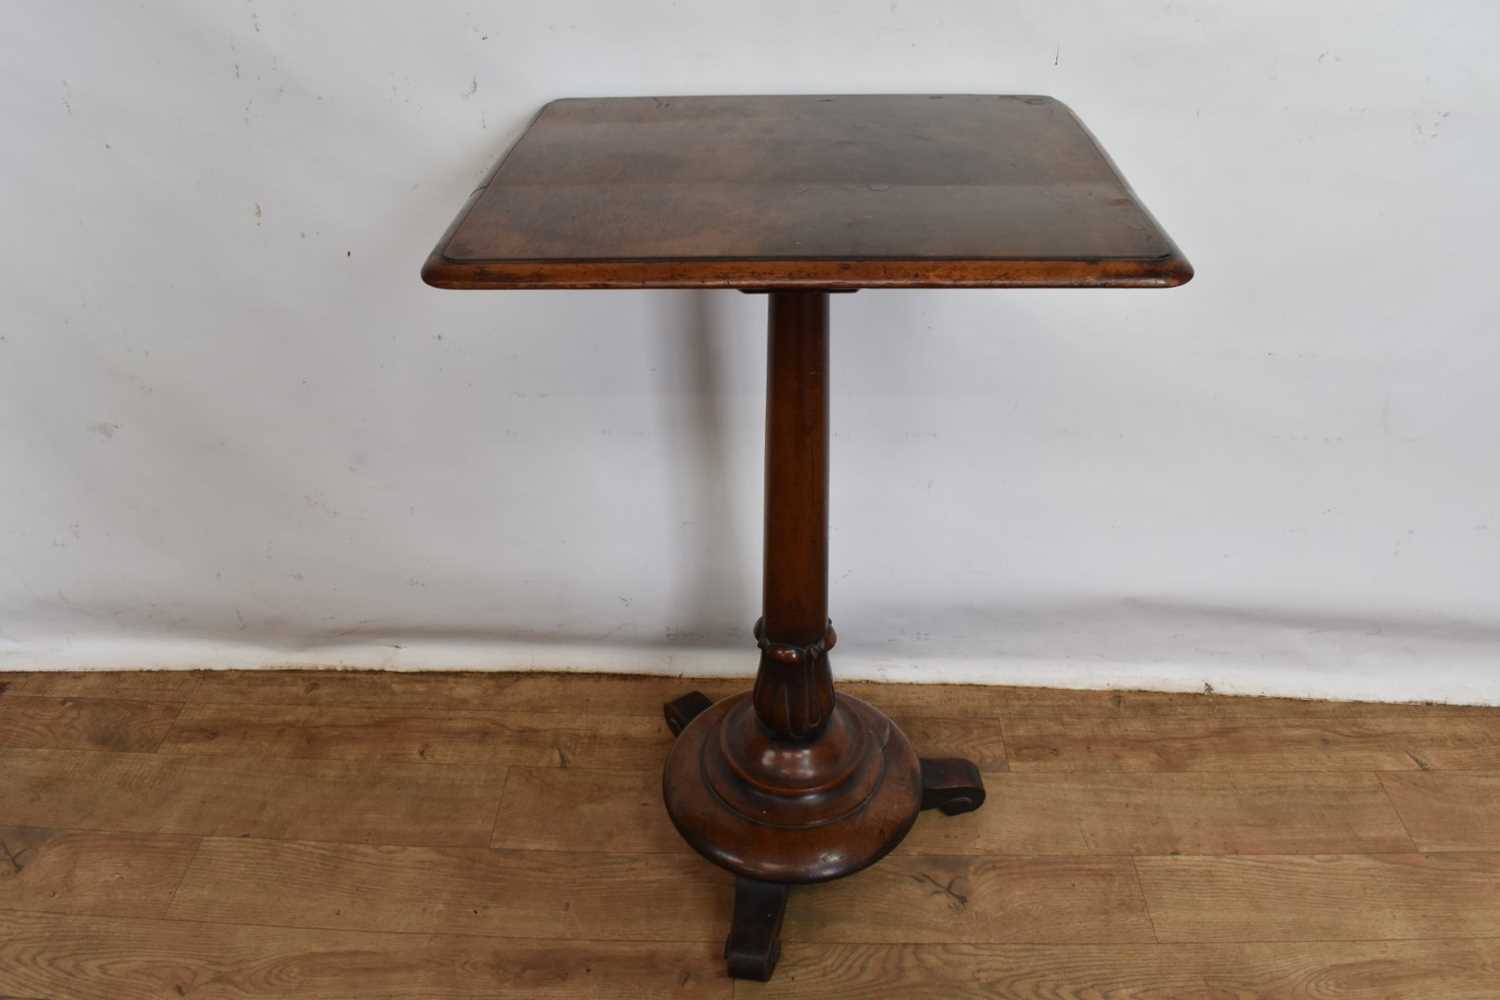 Regency square topped single mahogany pedestal table - Image 5 of 8